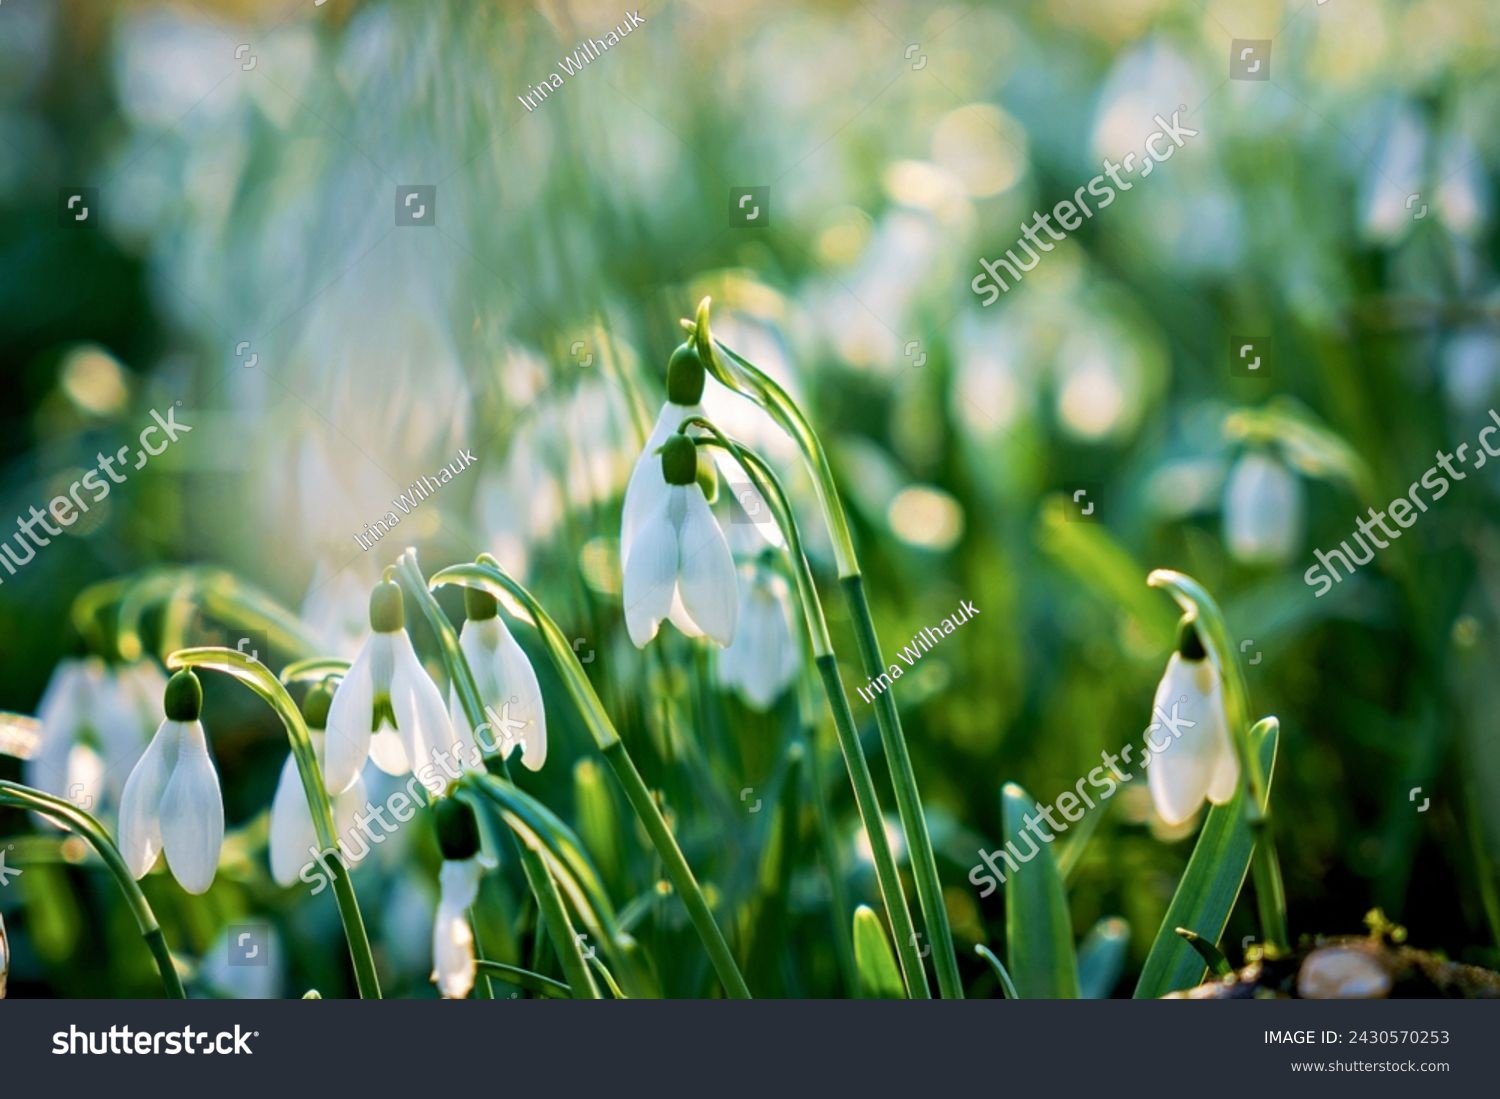 Snowdrop or common snowdrop, Galanthus nivalis flowers. Snowdrops after the snow has melted. In the forest in the wild in spring snowdrops bloom. #2430570253